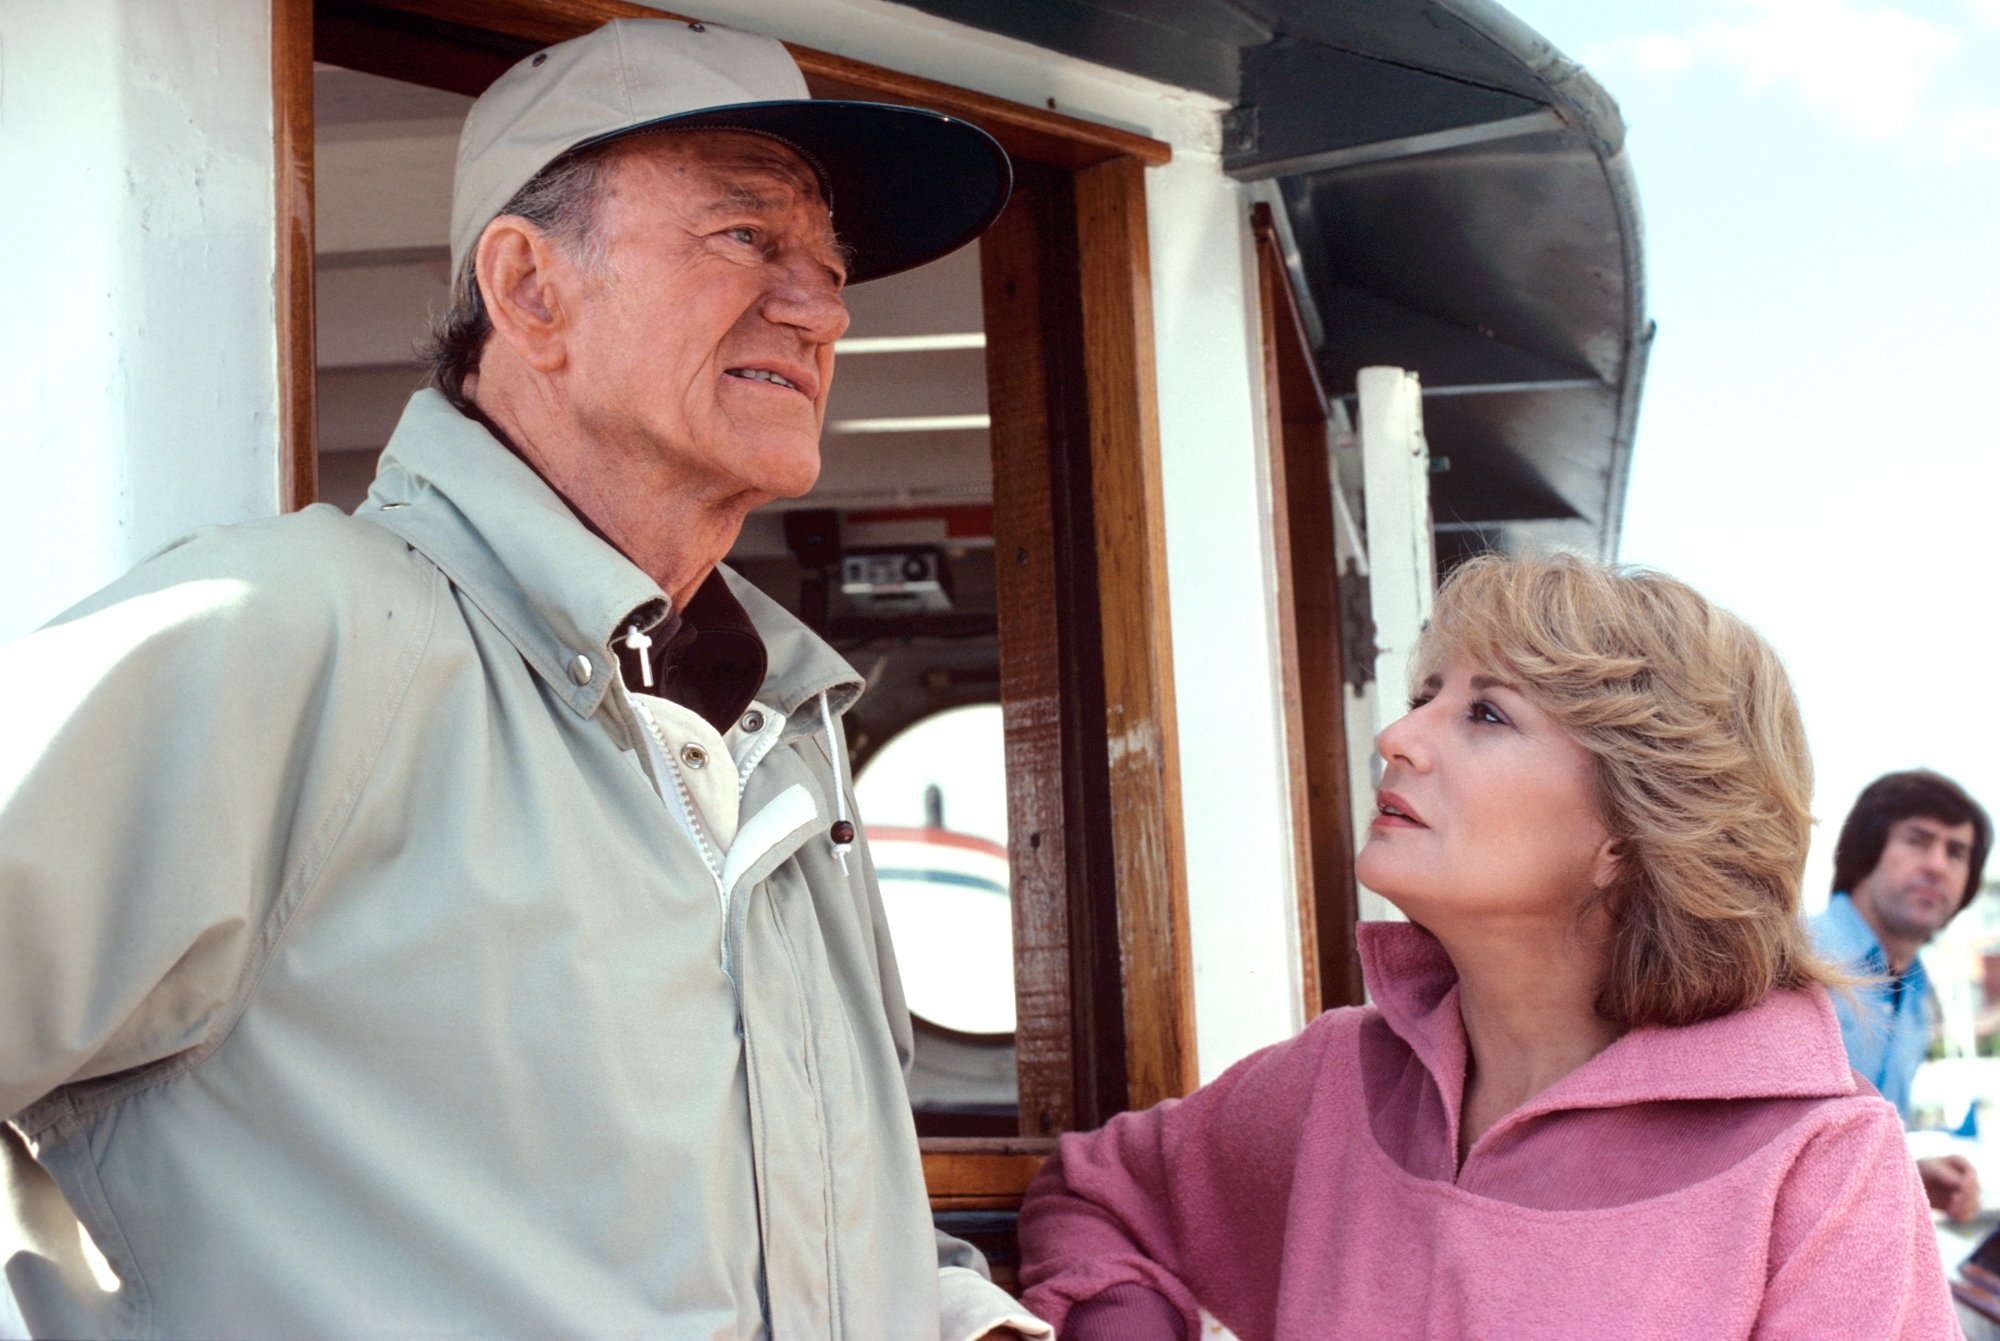 John Wayne and Barbara Walters. They're wearing jackets on his boat. Walters is looking up at Wayne, who is looking out at the water.